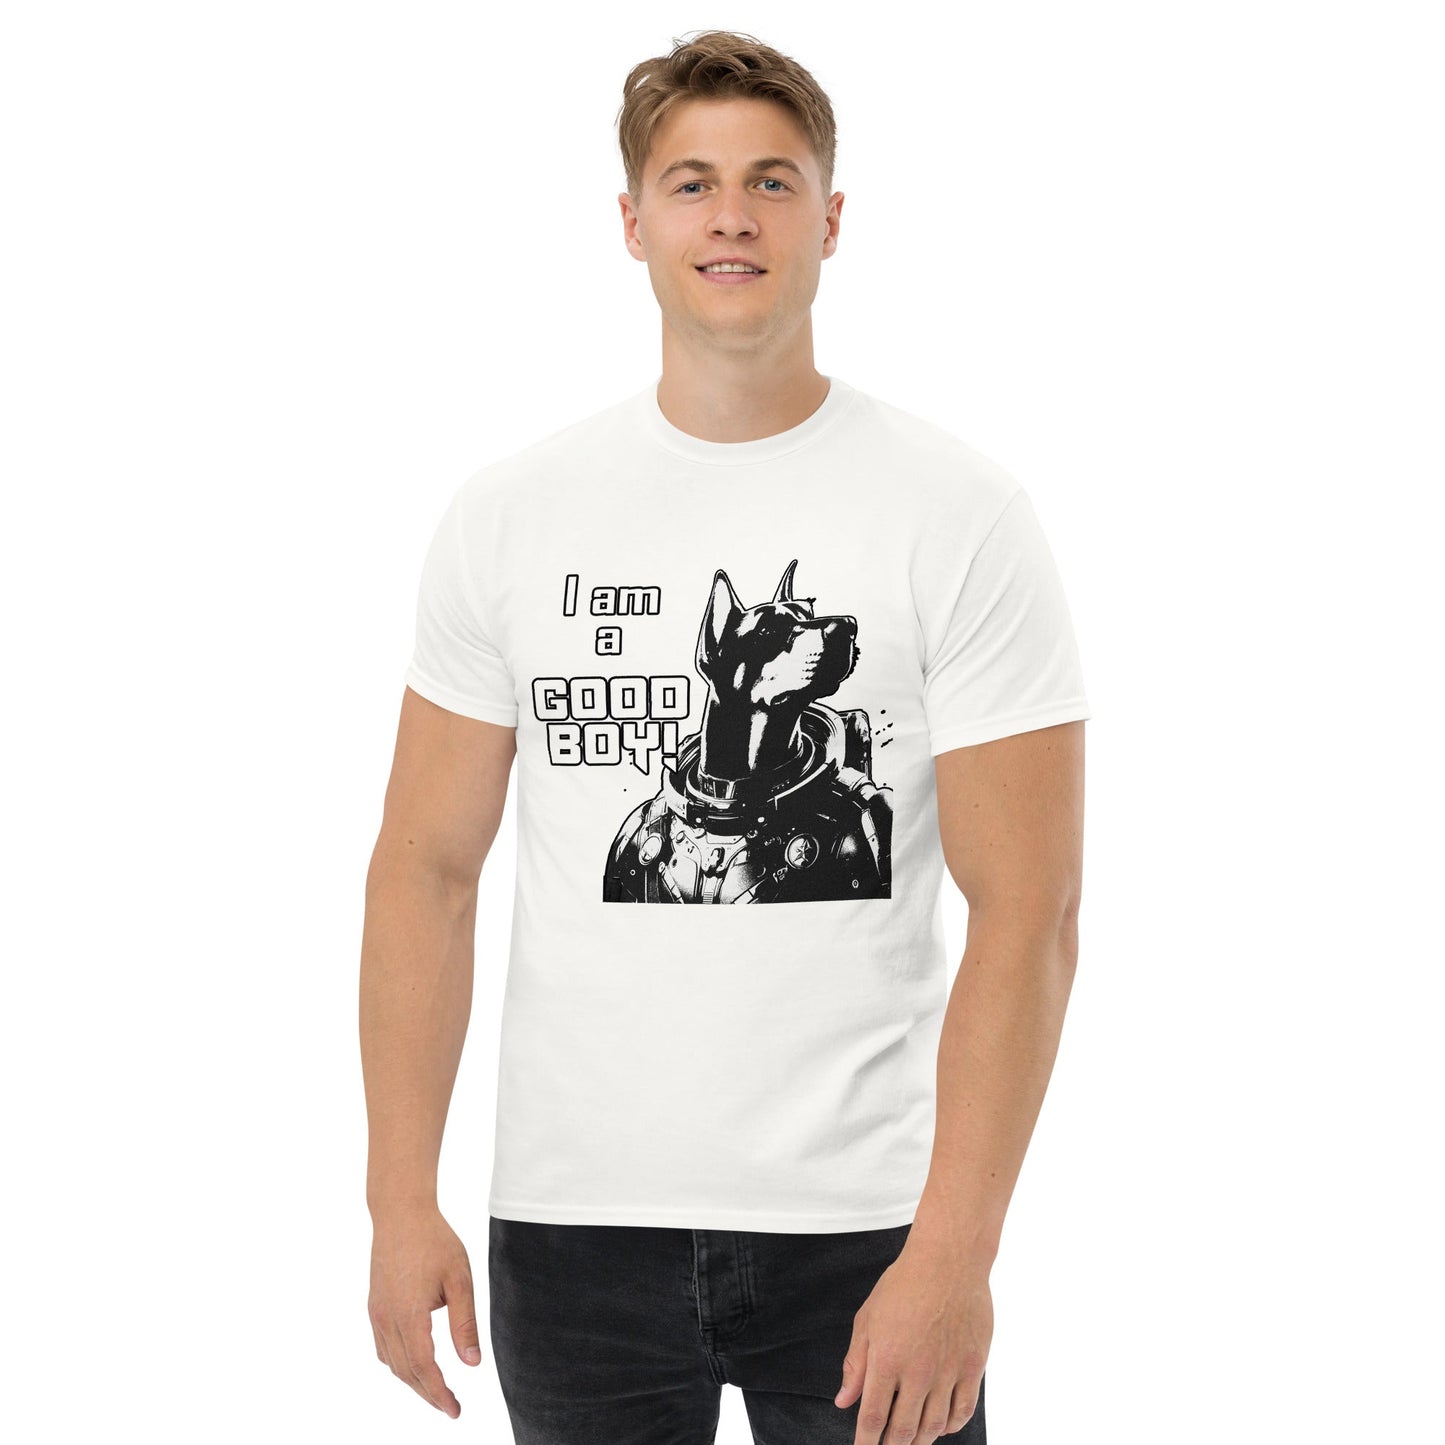 I Am a Good Boy Men's Classic Tee (Light) - Join General Major in Saving the Galaxy! - Spectral Ink Shop - T-Shirt -6203244_11576